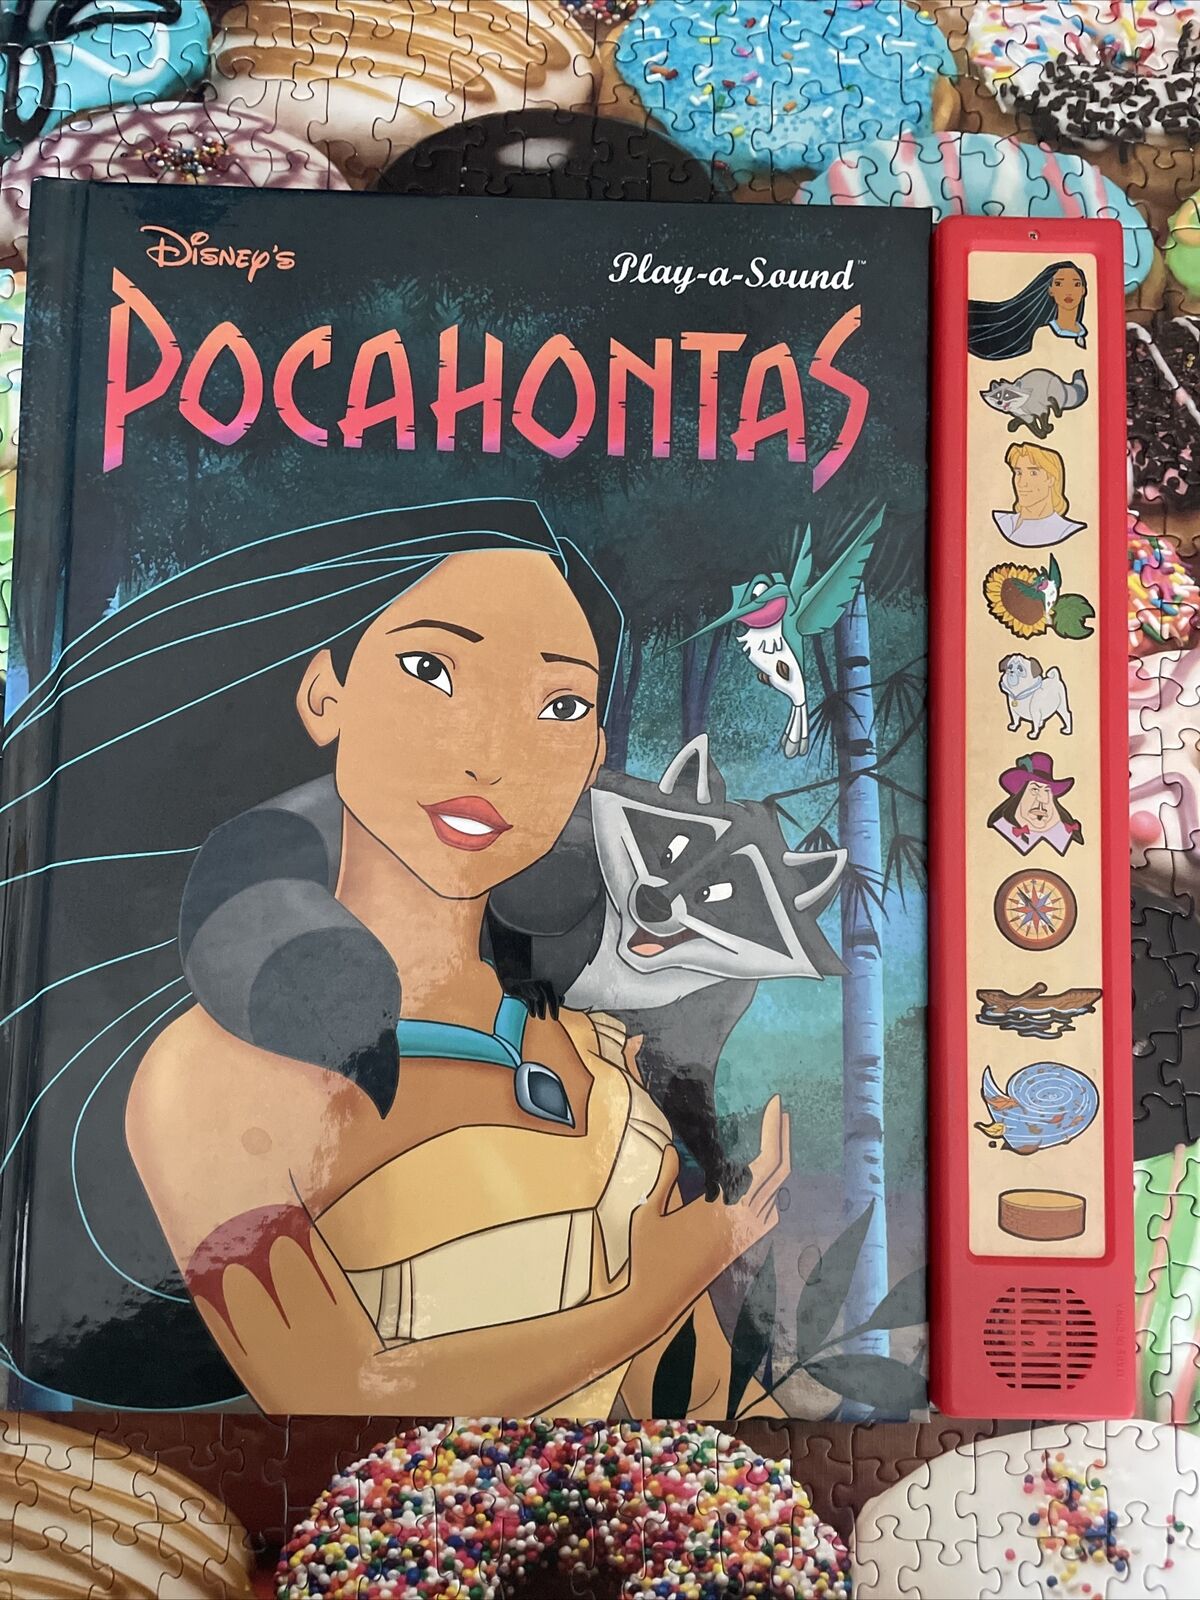 Disney\'s Pocahontas Play-a-Sound Interactive Very Good Used Condition 1995 